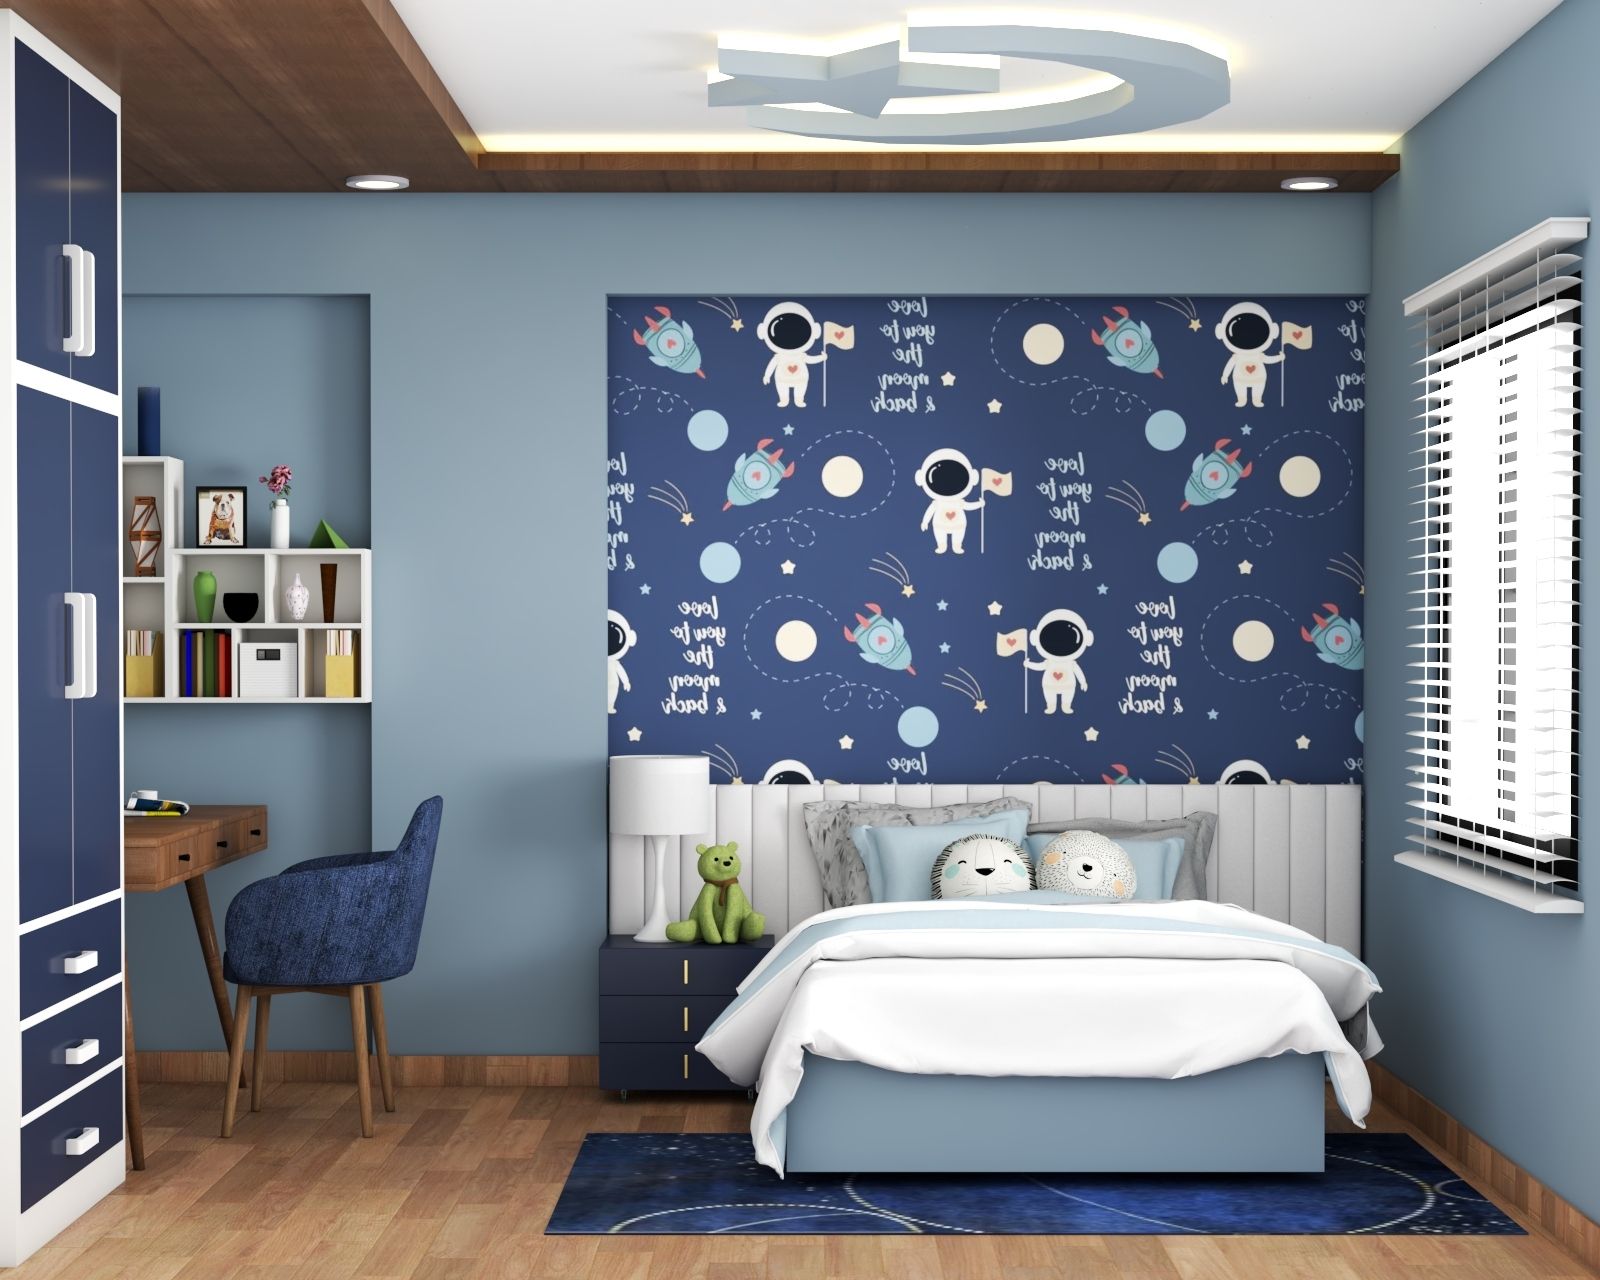 Contemporary Kids Room With A Blue Queen Size Bed And Wall-Mounted Open Storage